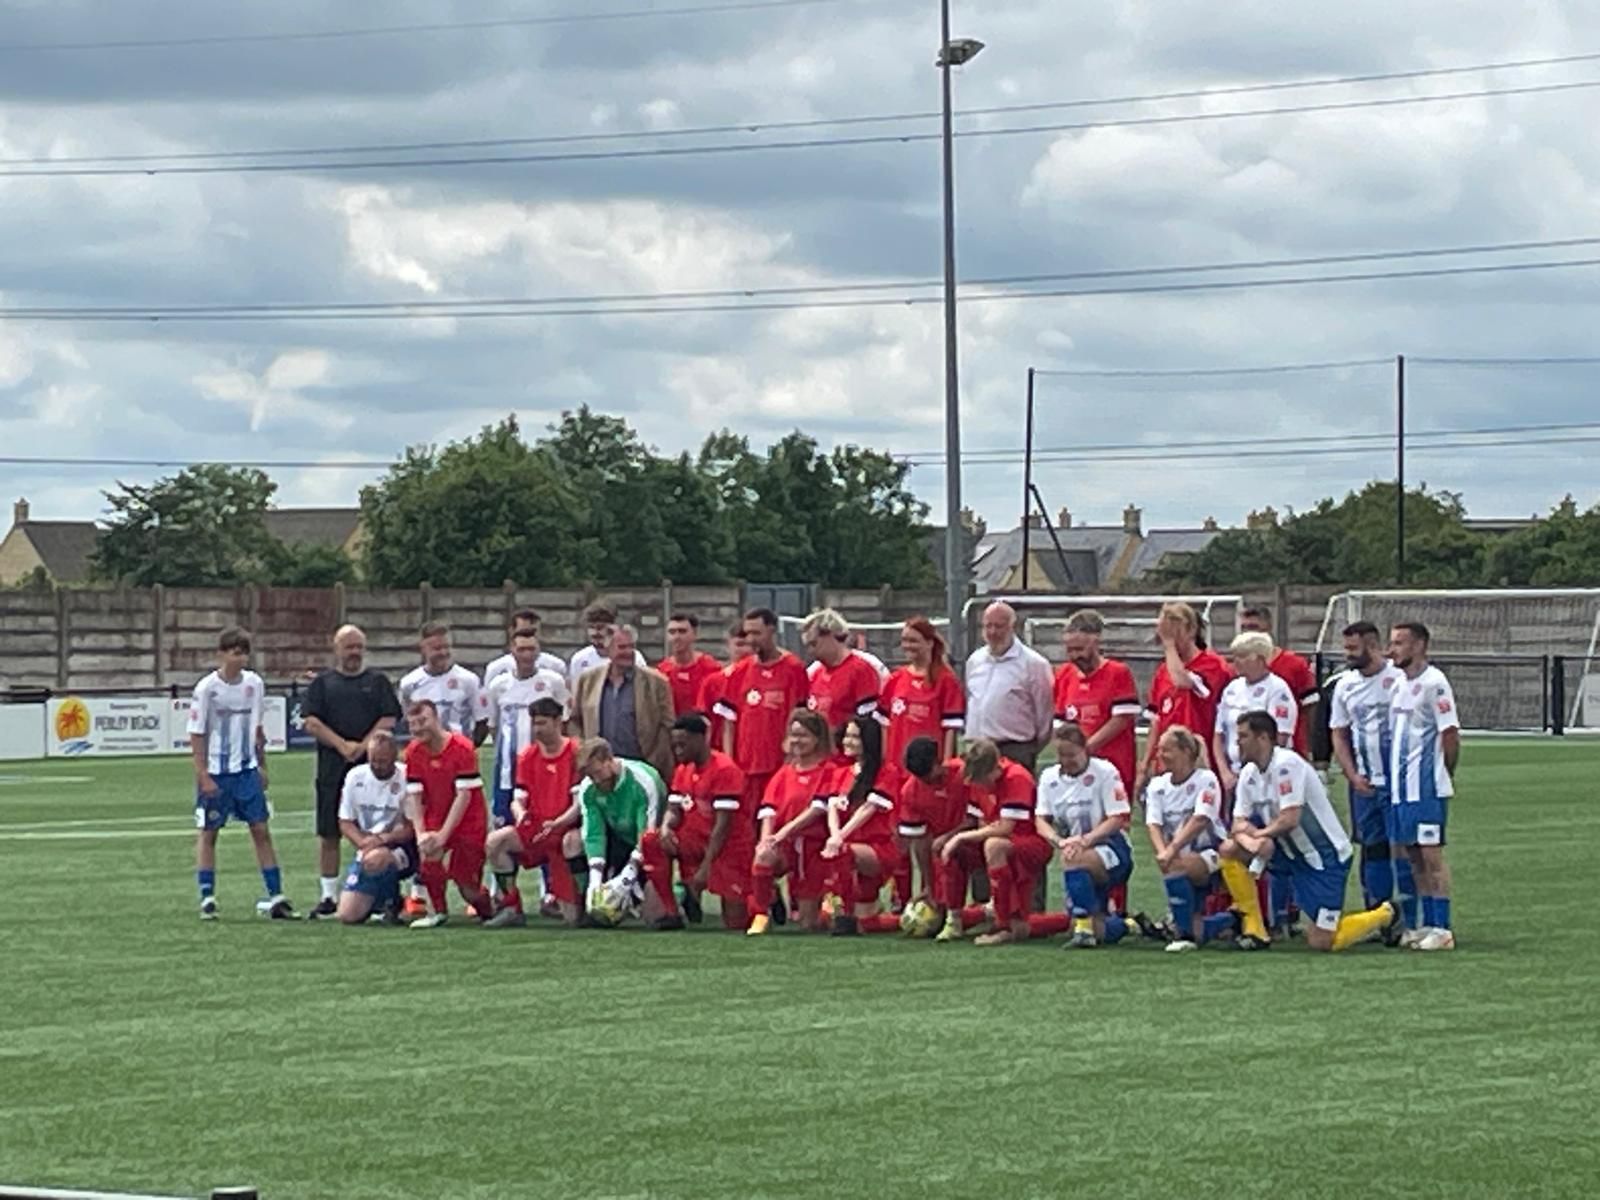 THIS COUNTRY CHARITY MATCH